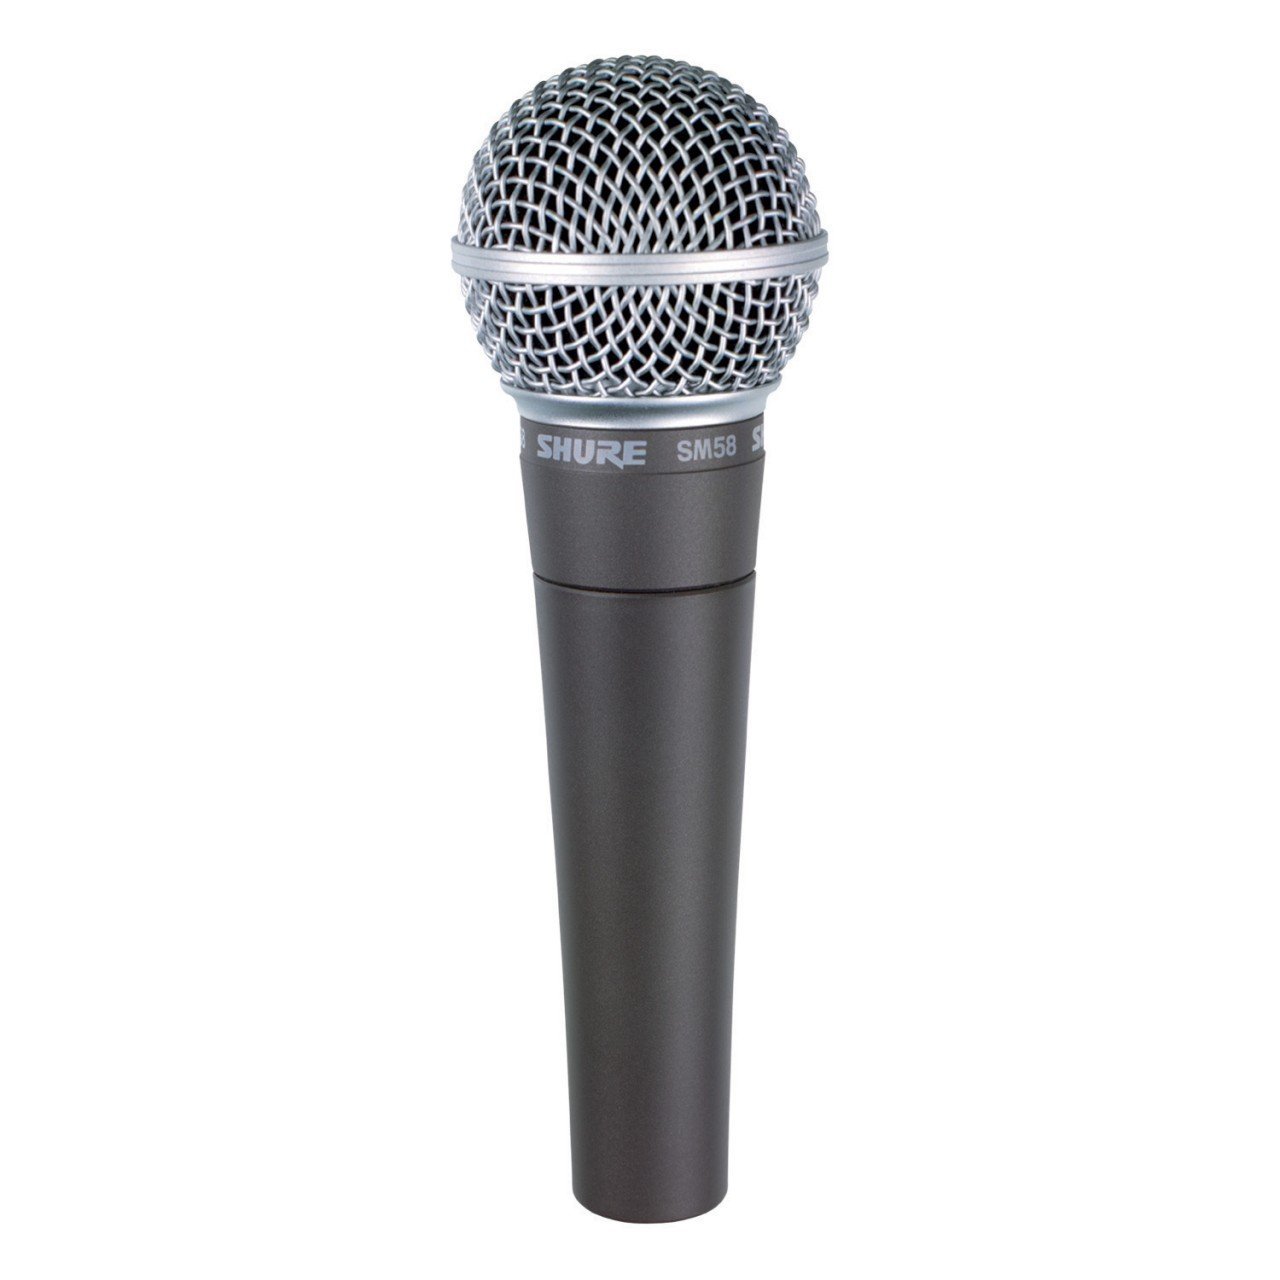 Shure SM58-LC Rugged Professional Studio Vocal Microphone, Cable Not Included - image 4 of 5